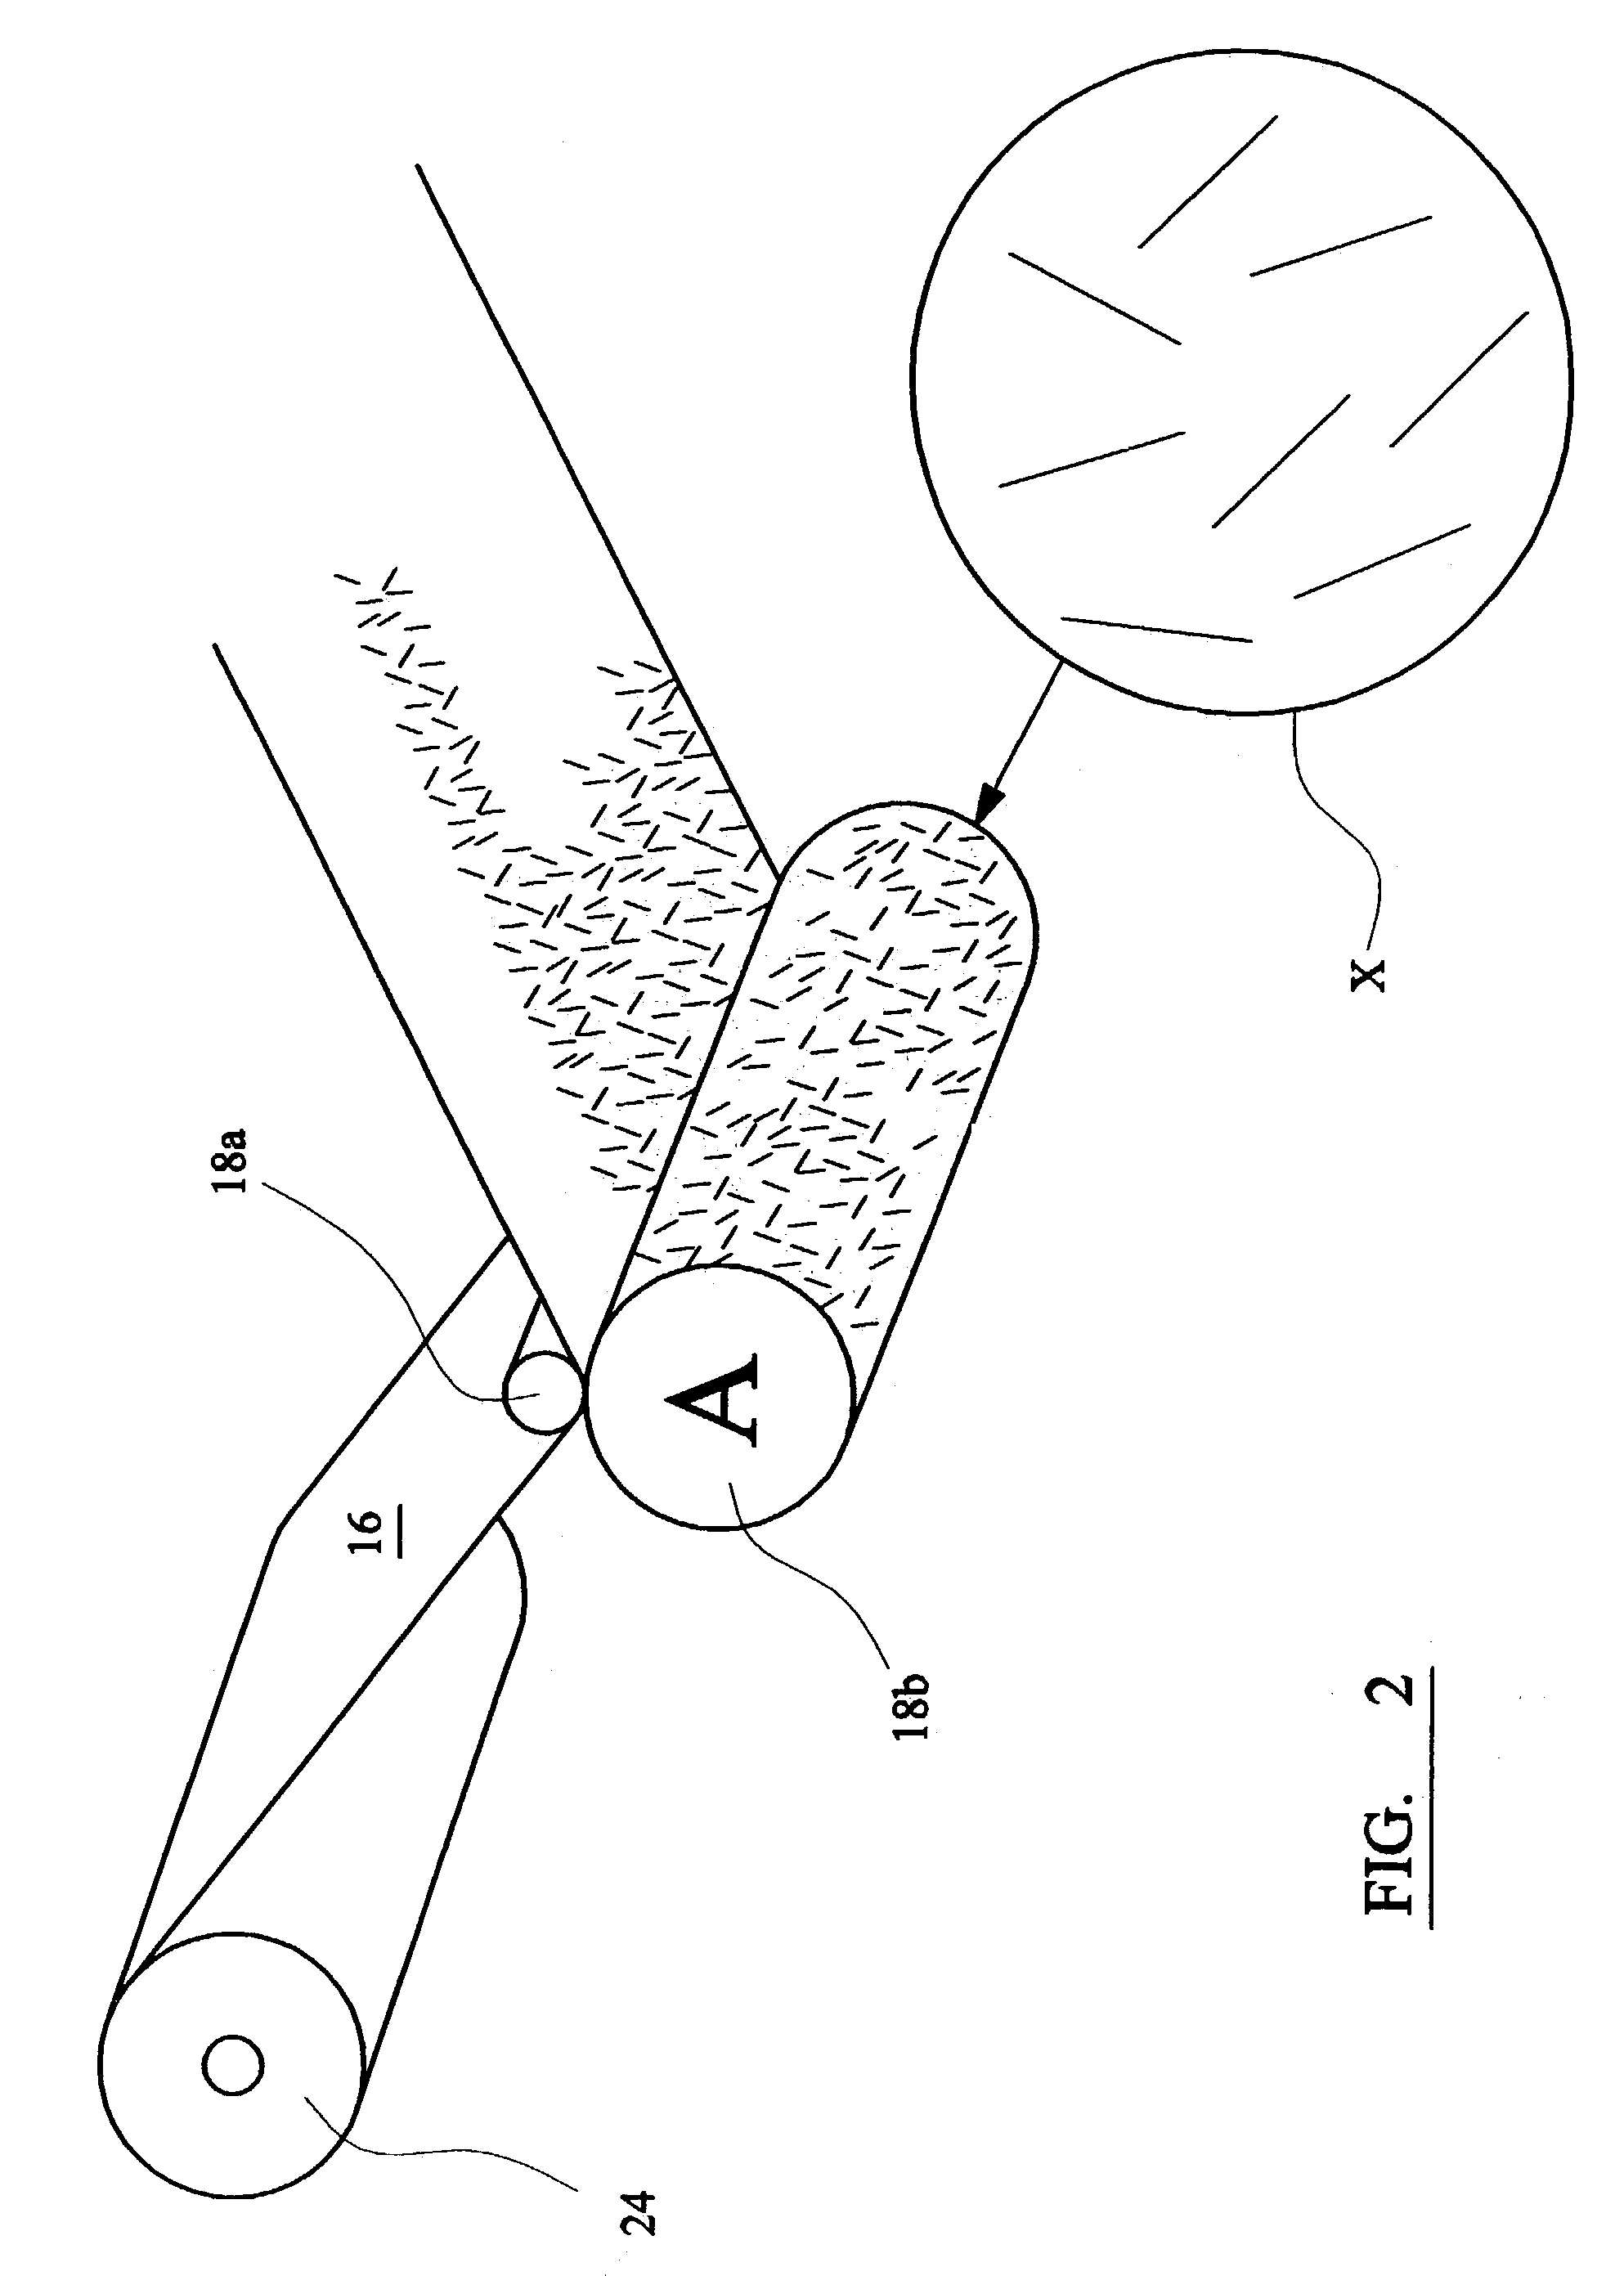 Method and apparatus for marking articles